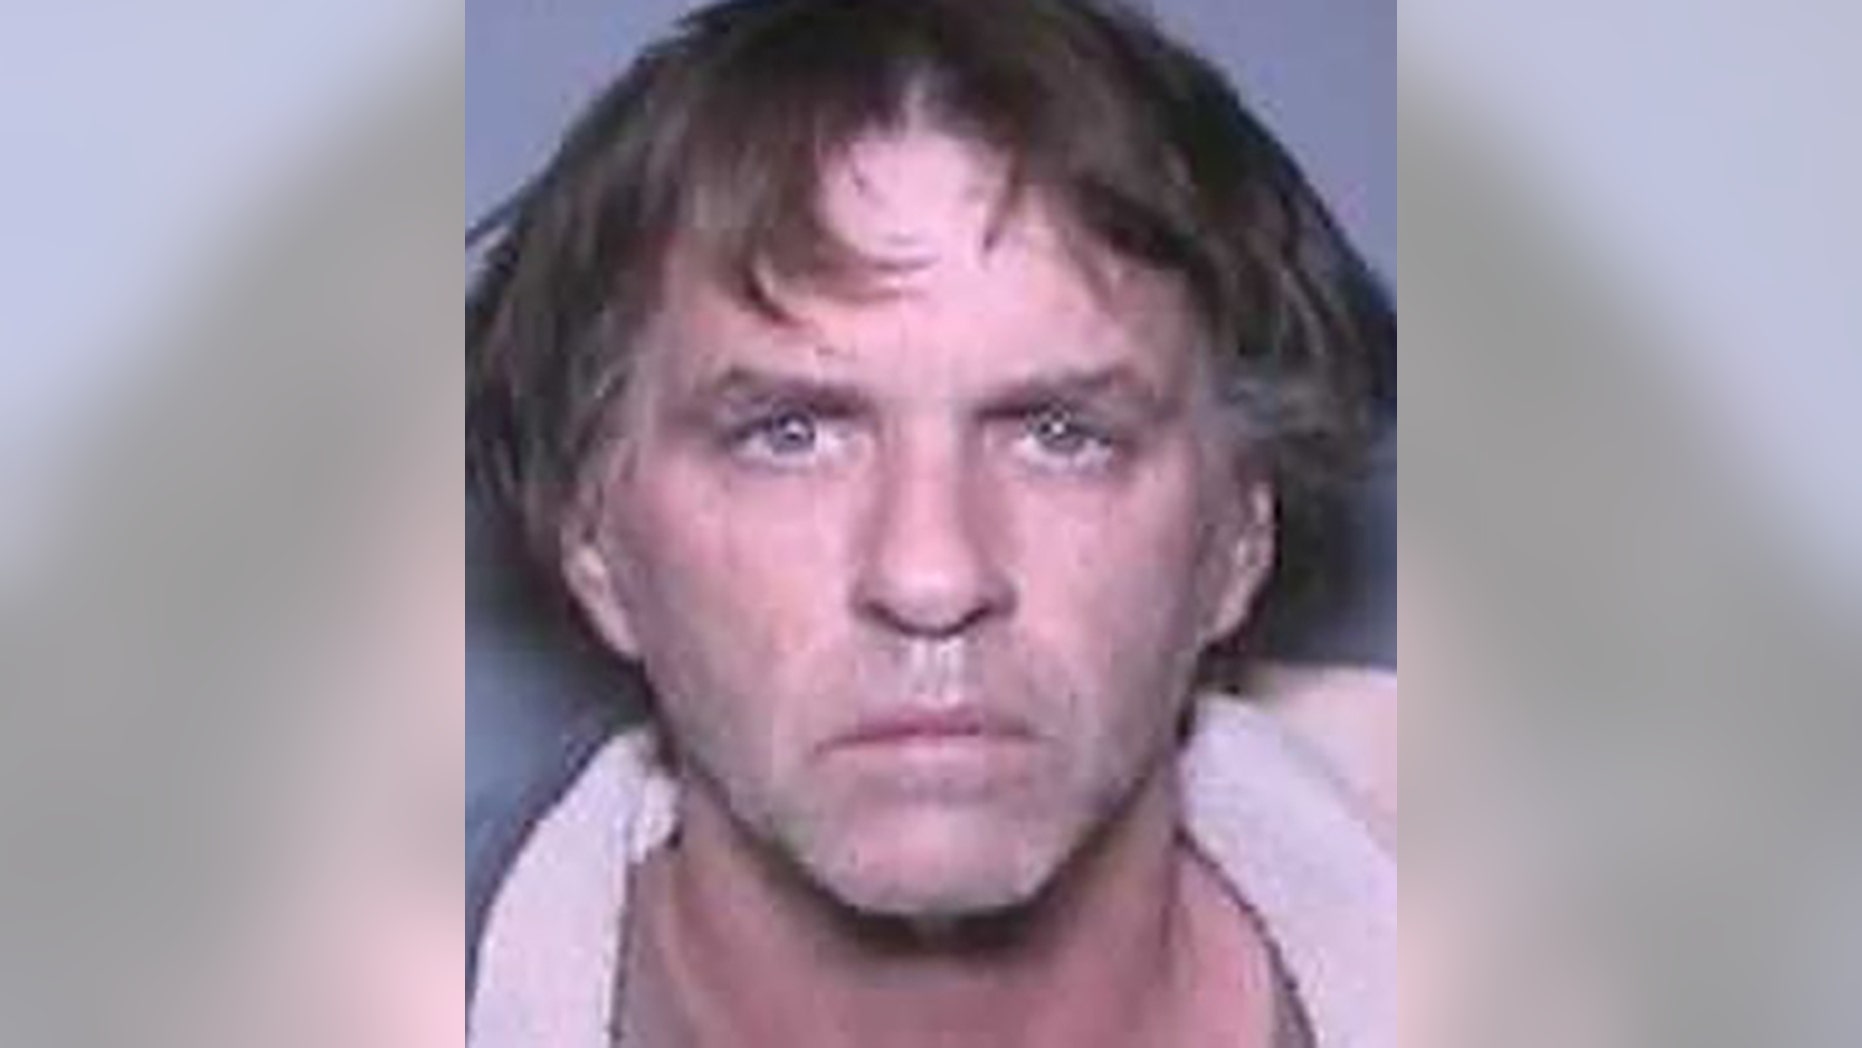 California man arrested in two 1990s cold-case rapes after police use familial DNA testing